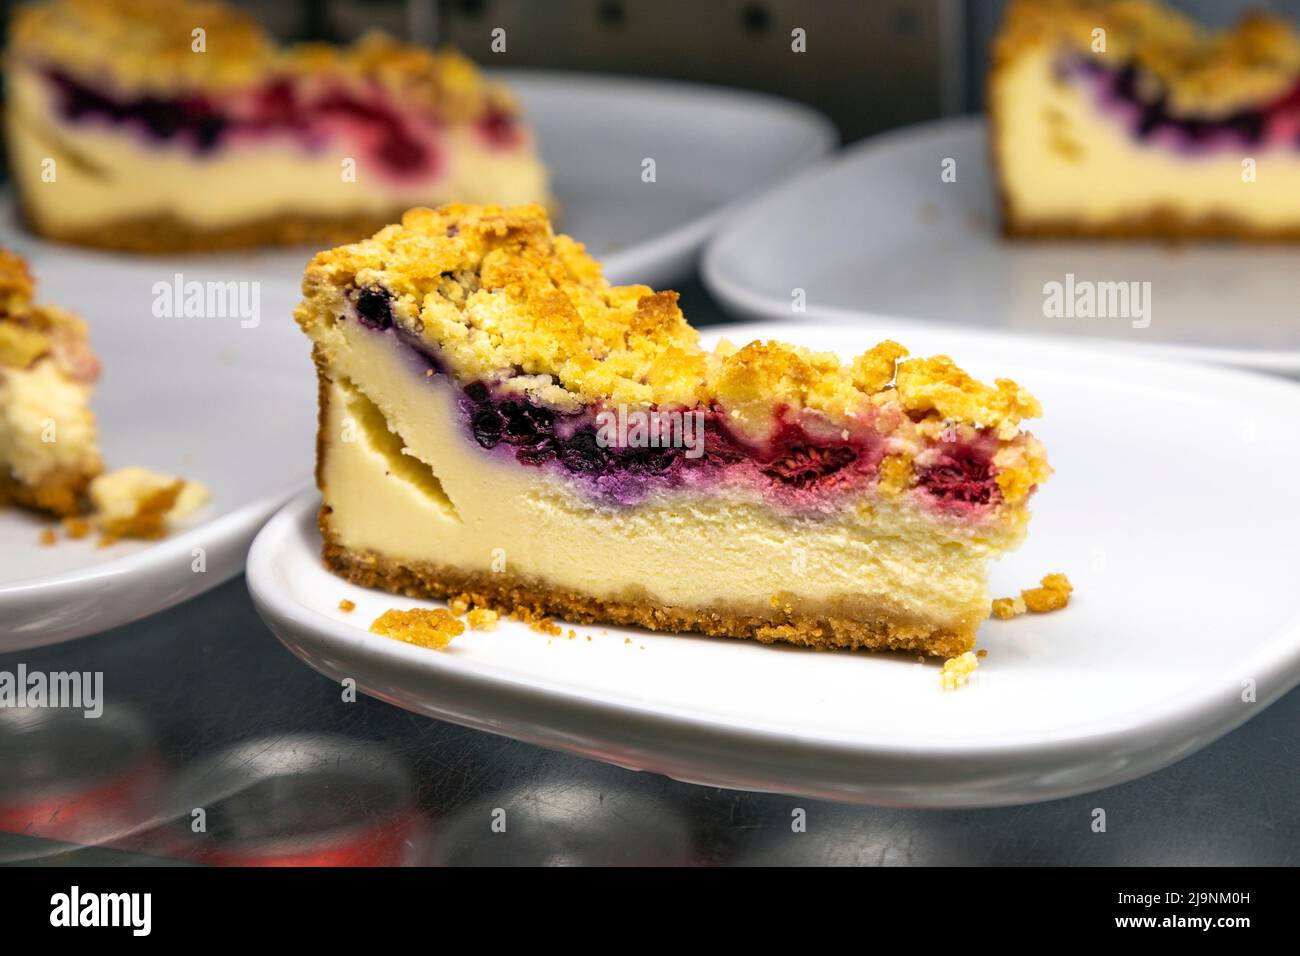 Raspberry and blueberry cheesecake slices at Ikea Stock Photo